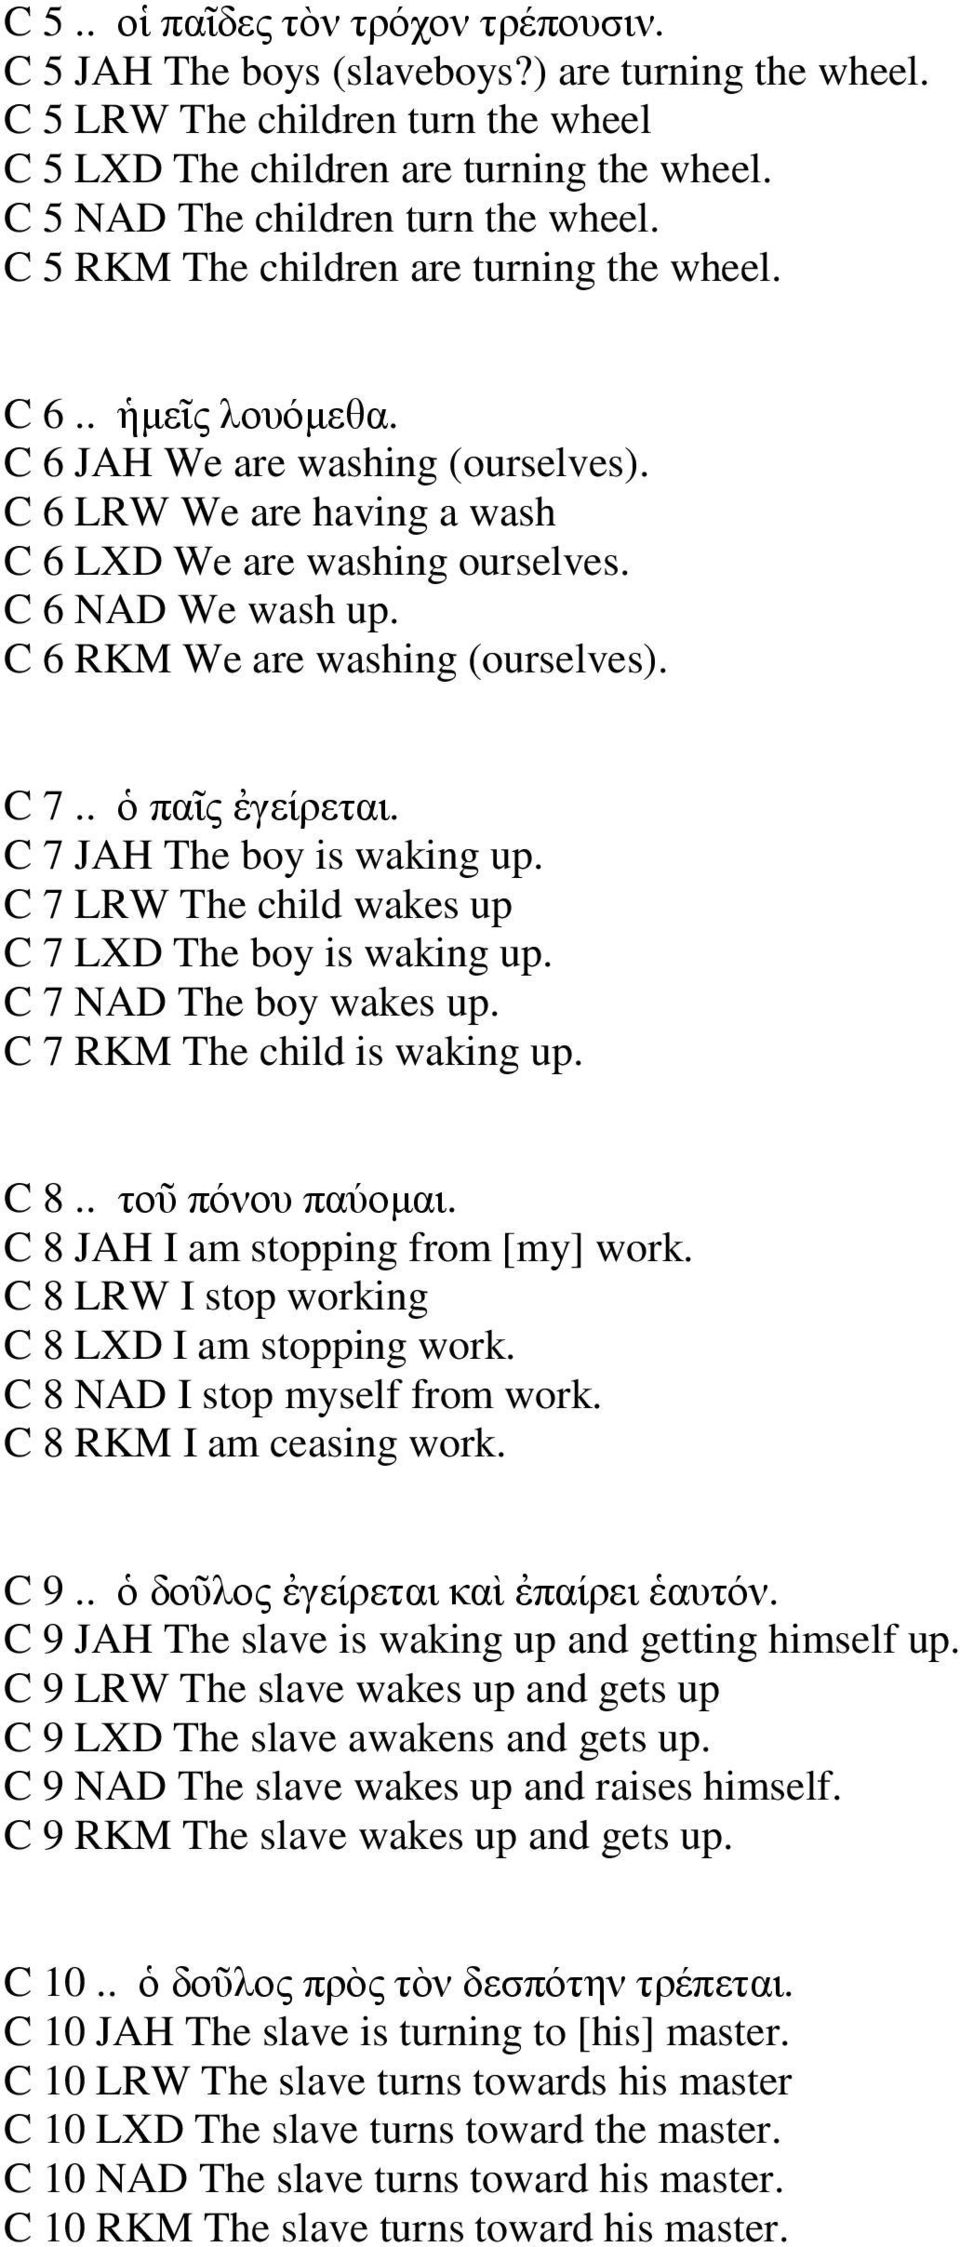 C 6 LRW We are having a wash C 6 LXD We are washing ourselves. C 6 NAD We wash up. C 6 RKM We are washing (ourselves). C 7.. ὁ παῖς ἐγείρεται. C 7 JAH The boy is waking up.